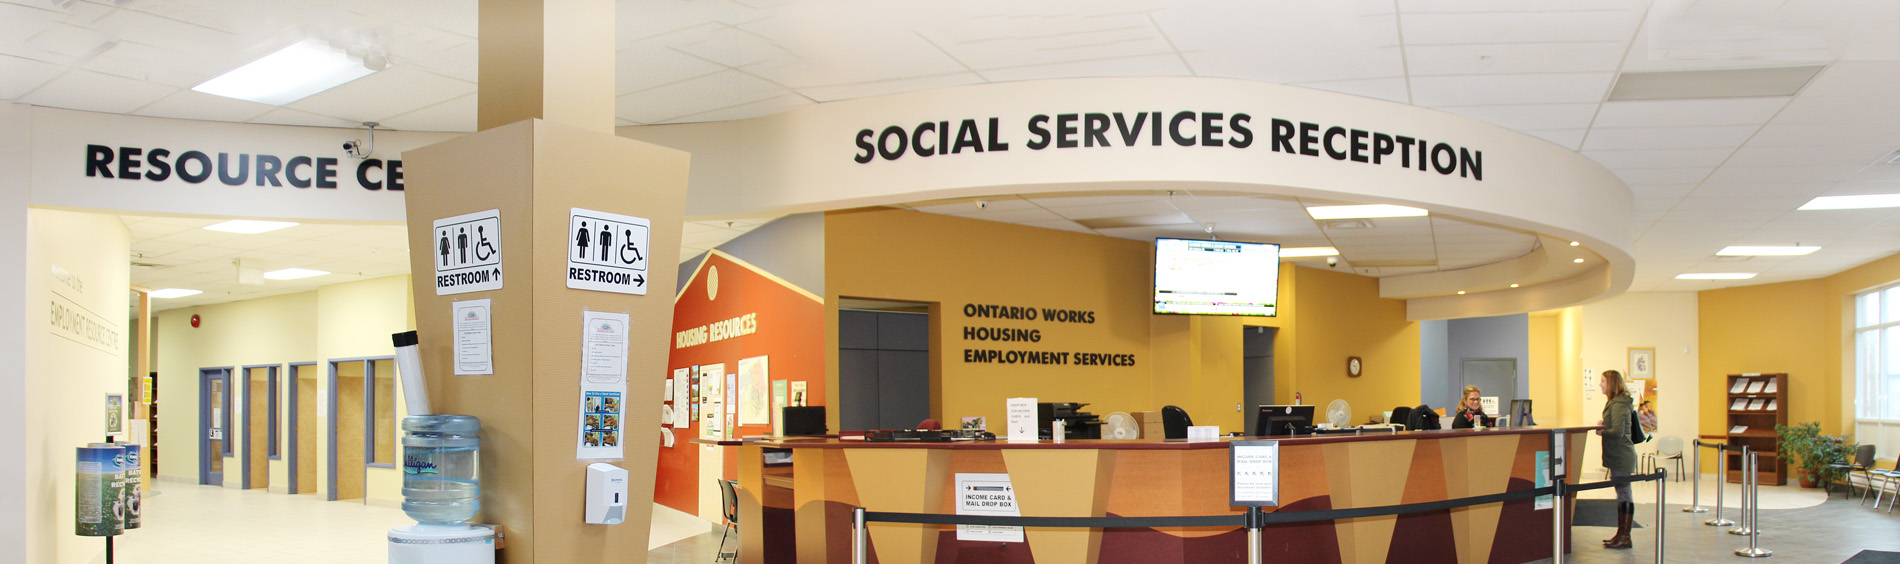 Health and Human Services front desk